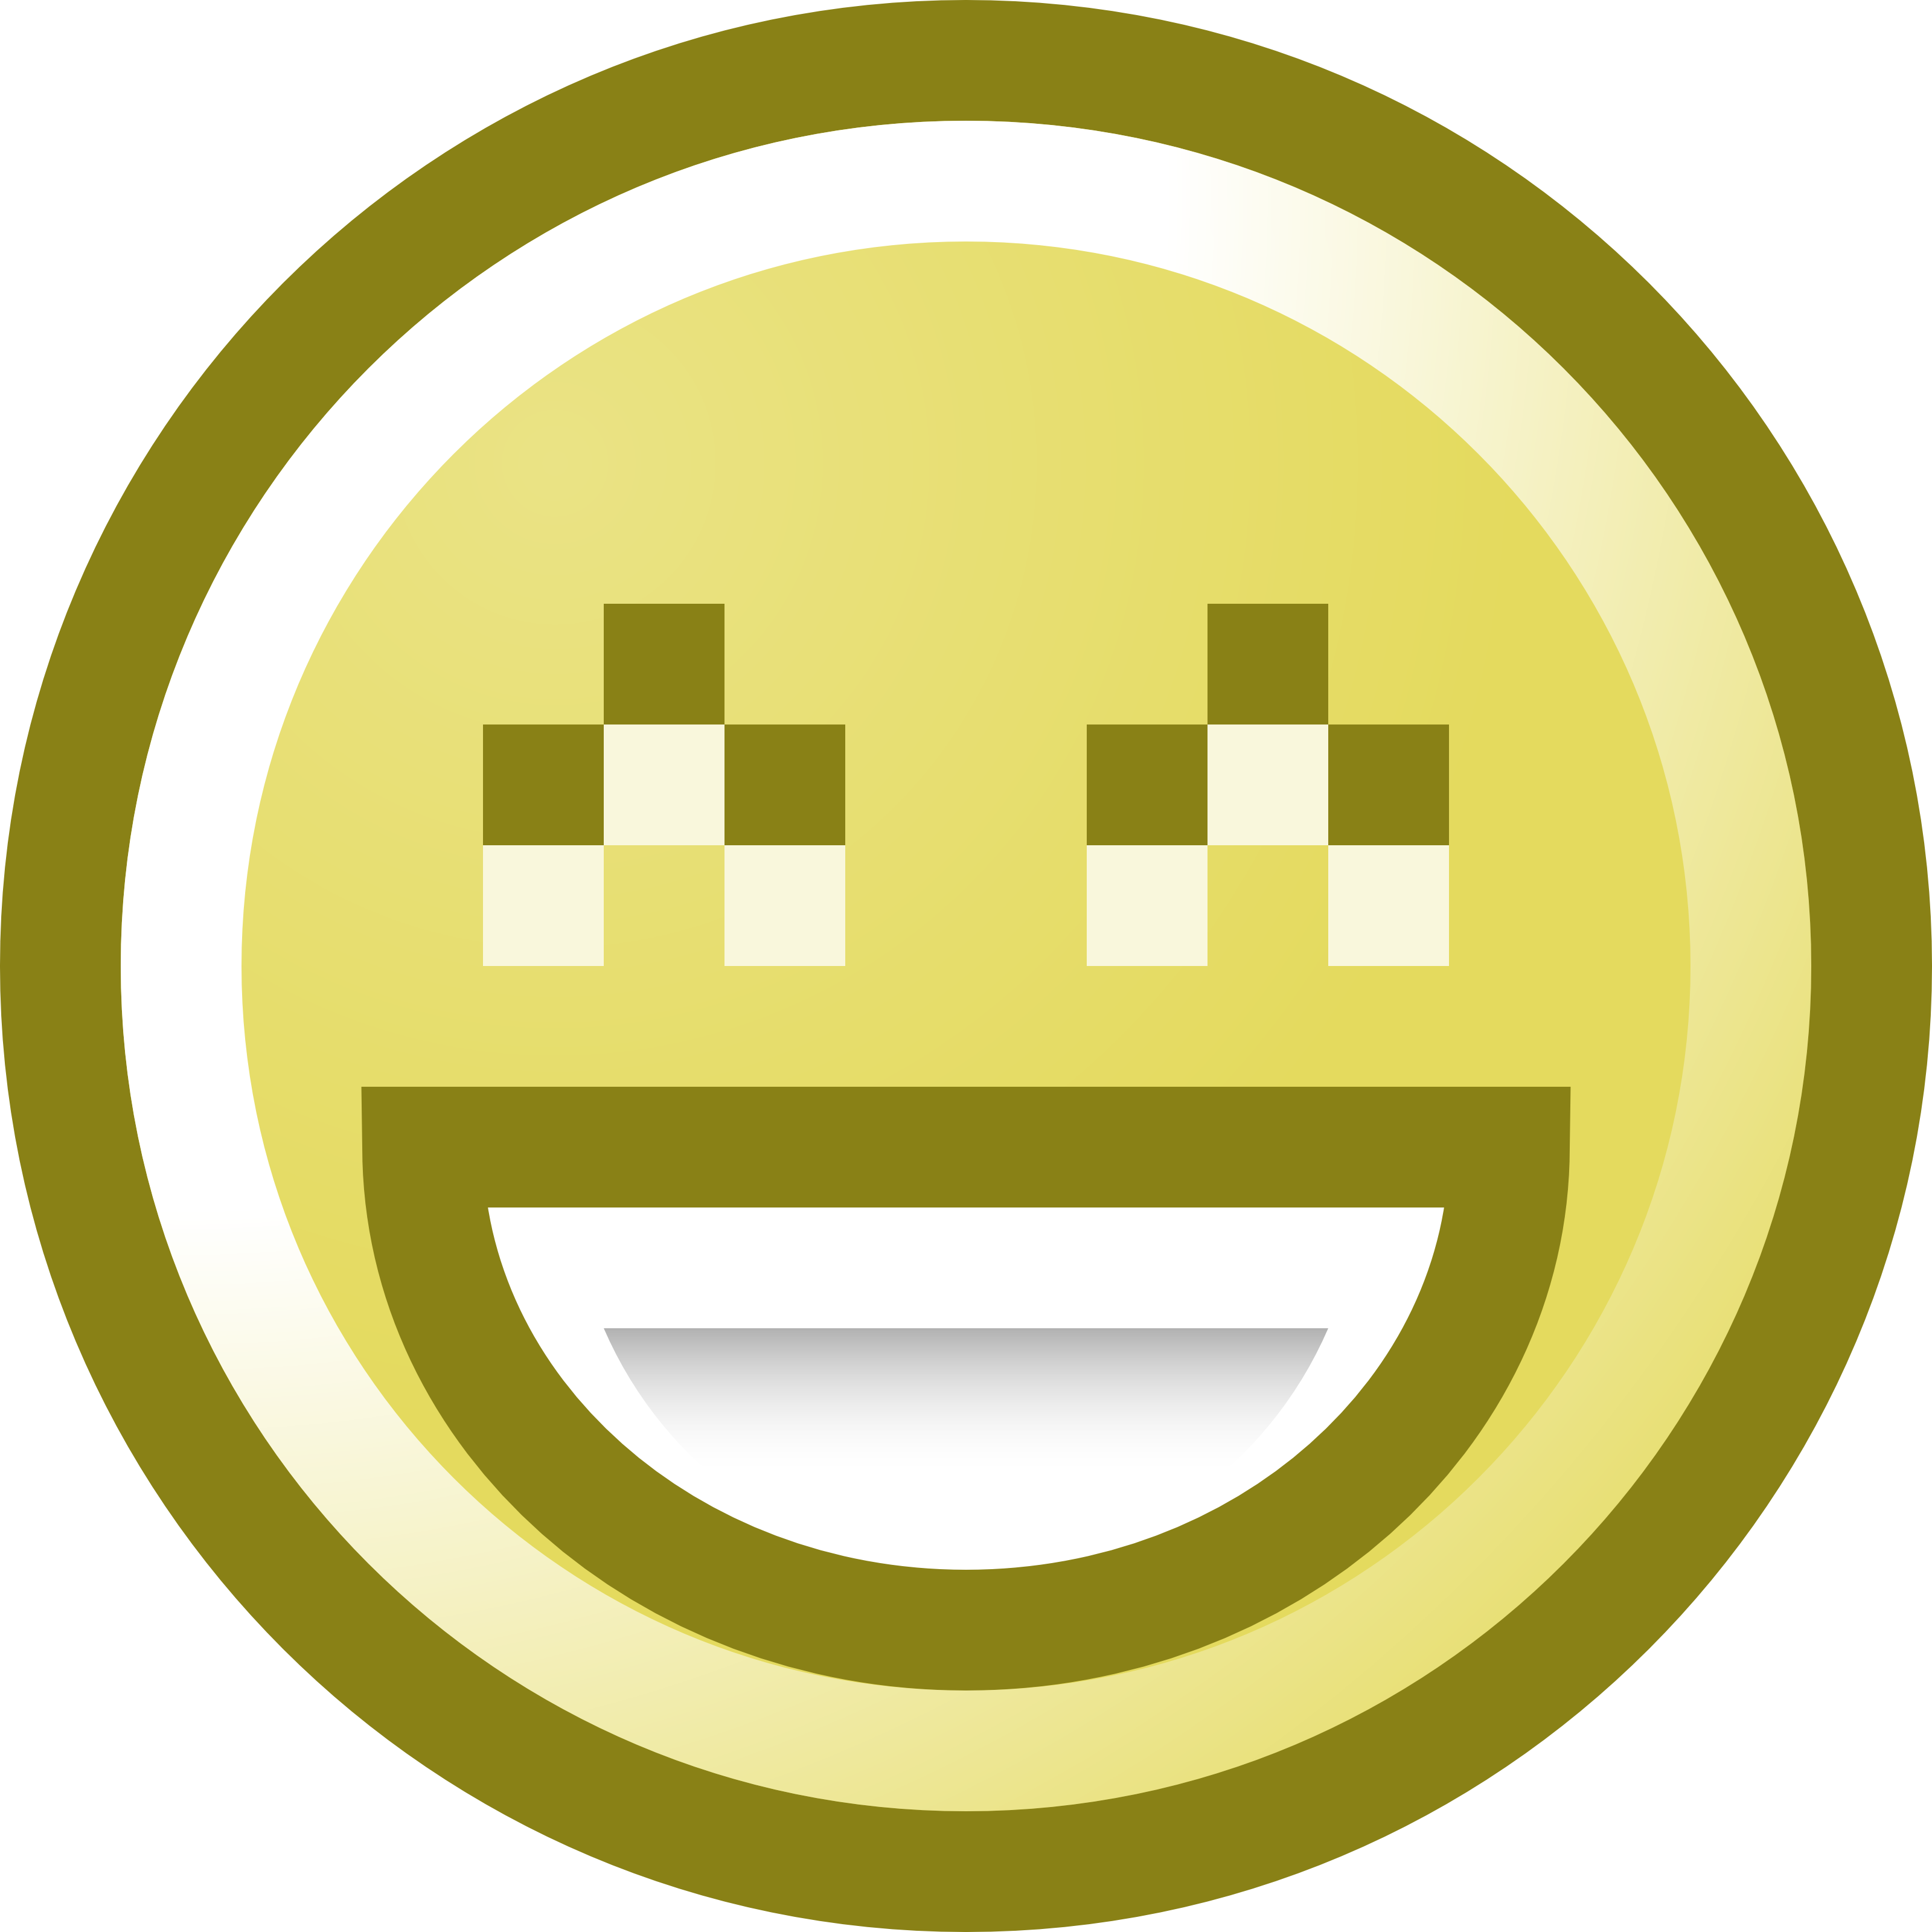 Free Smiley Face Clip Art Illustration - Smiley (3200x3200)